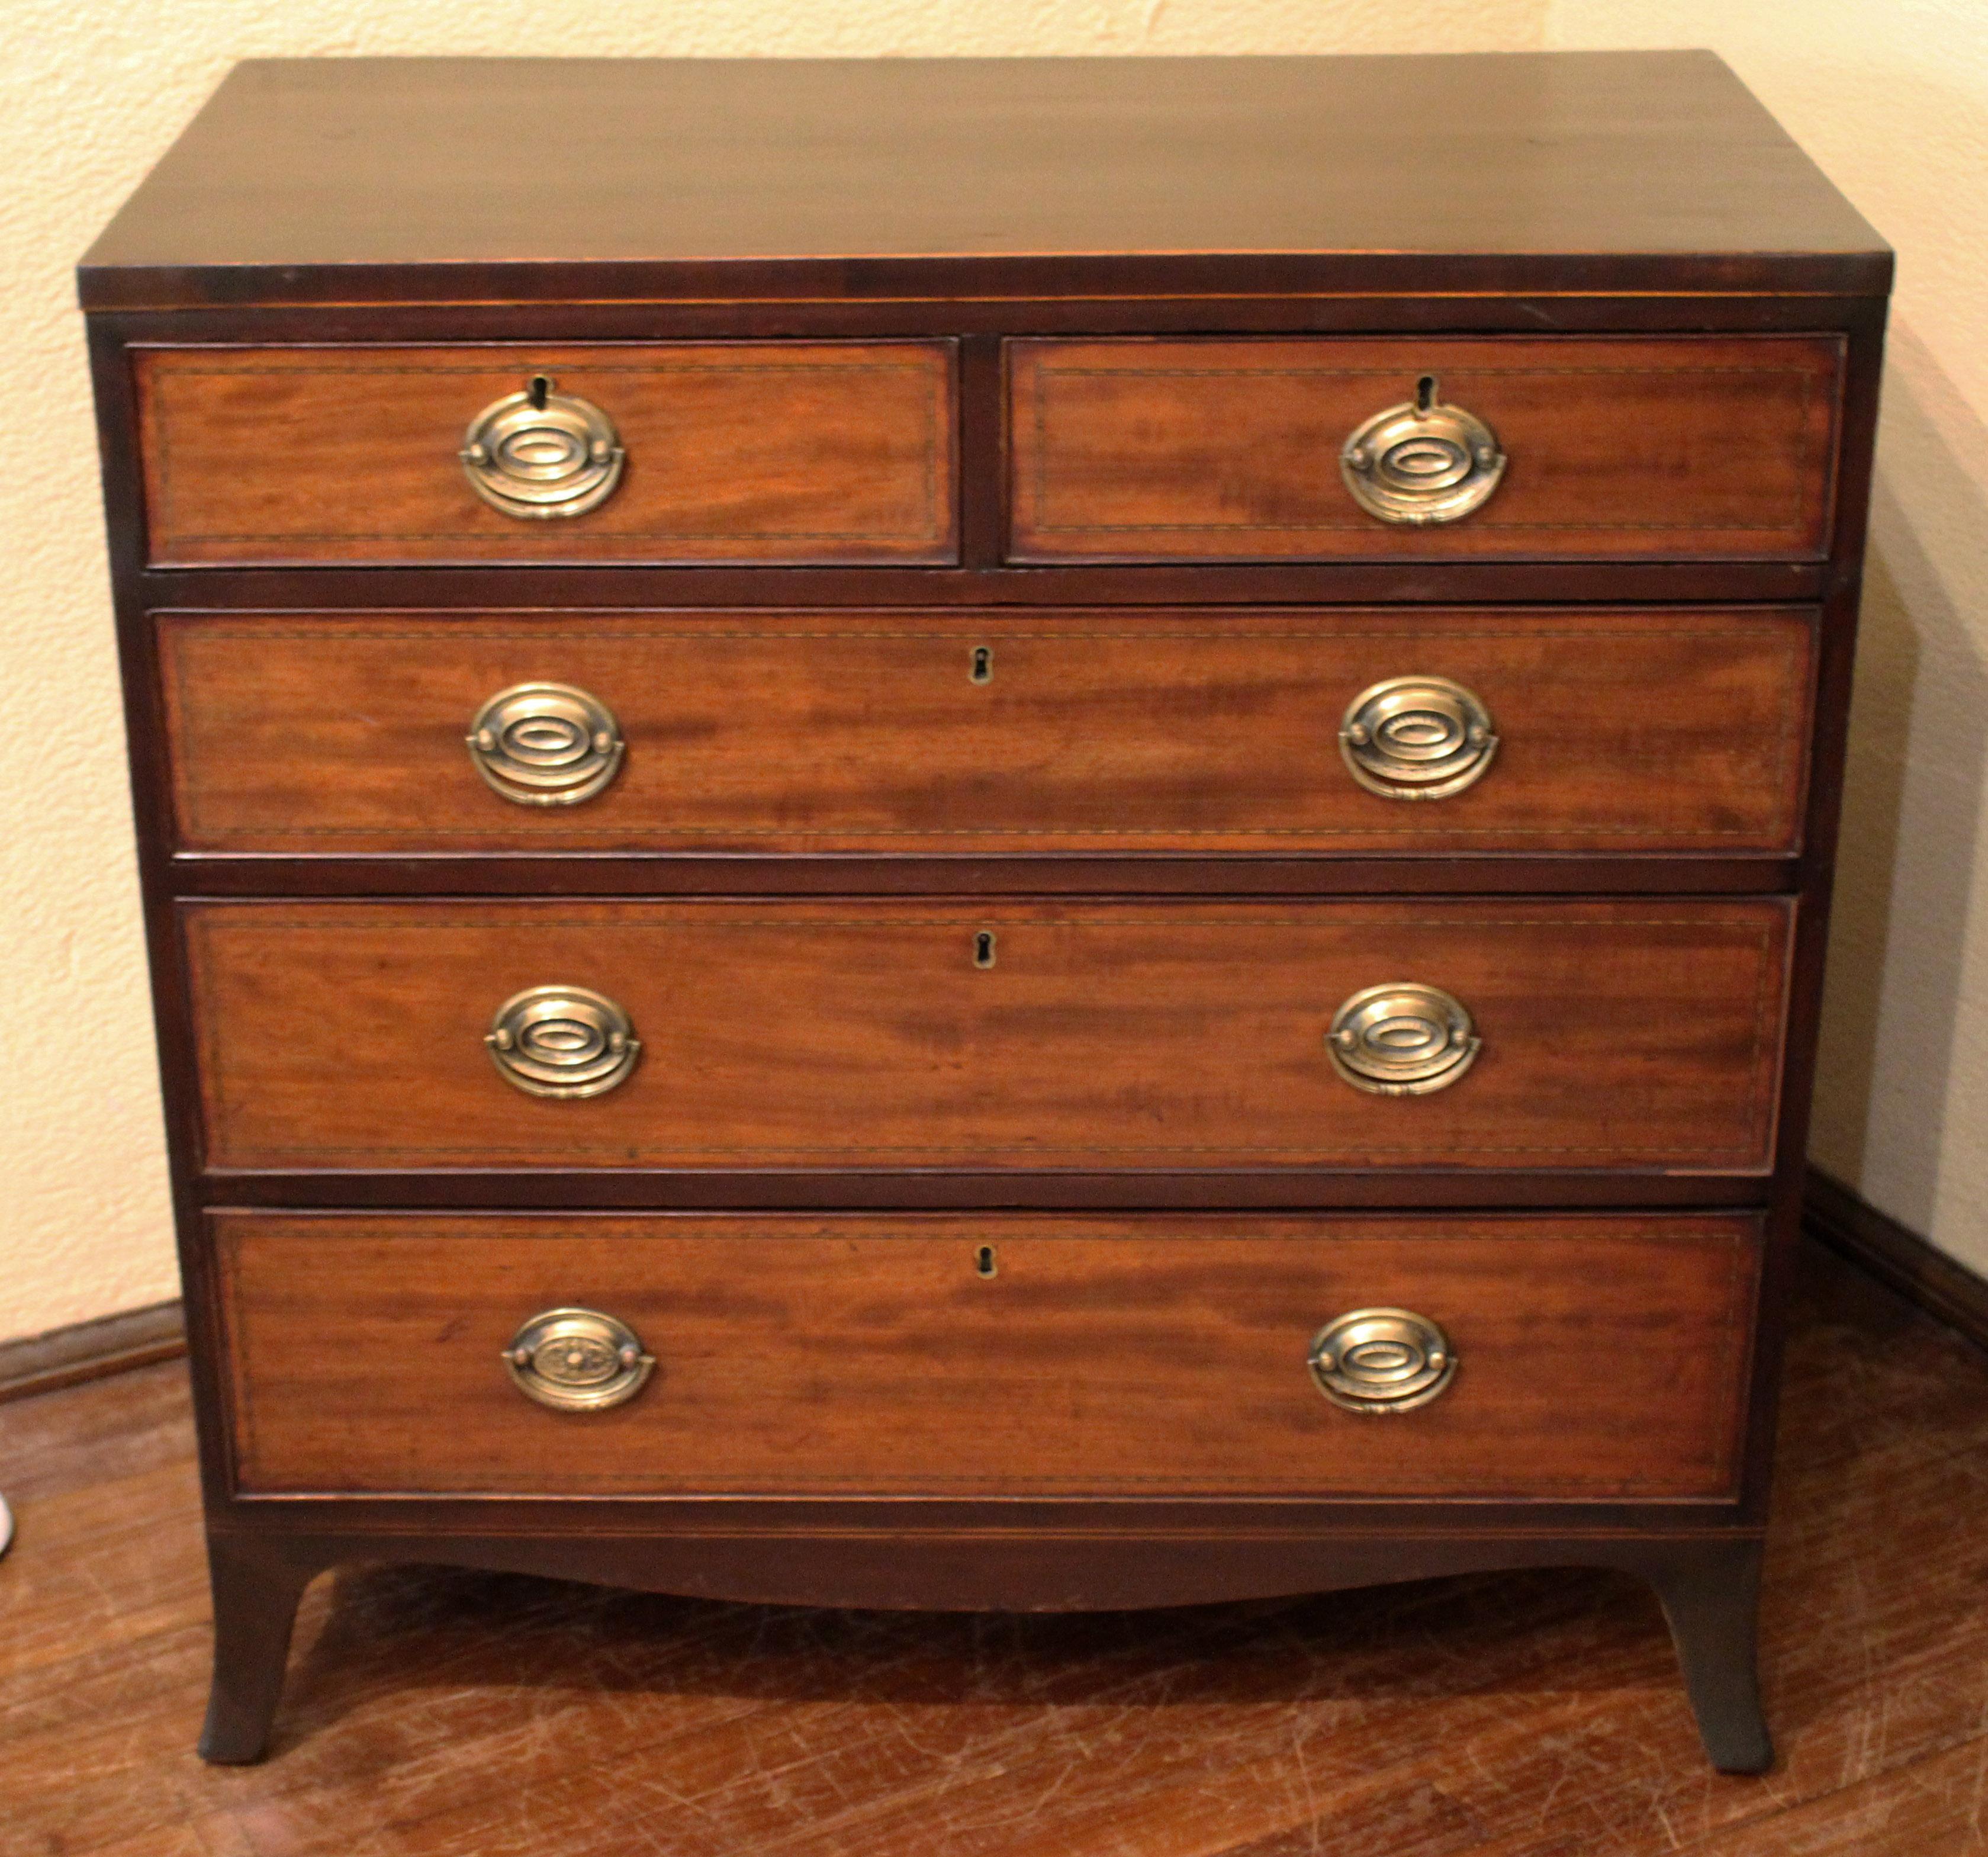 Mahogany English Late 18th Century Georgian Straight Front Chest of Drawers